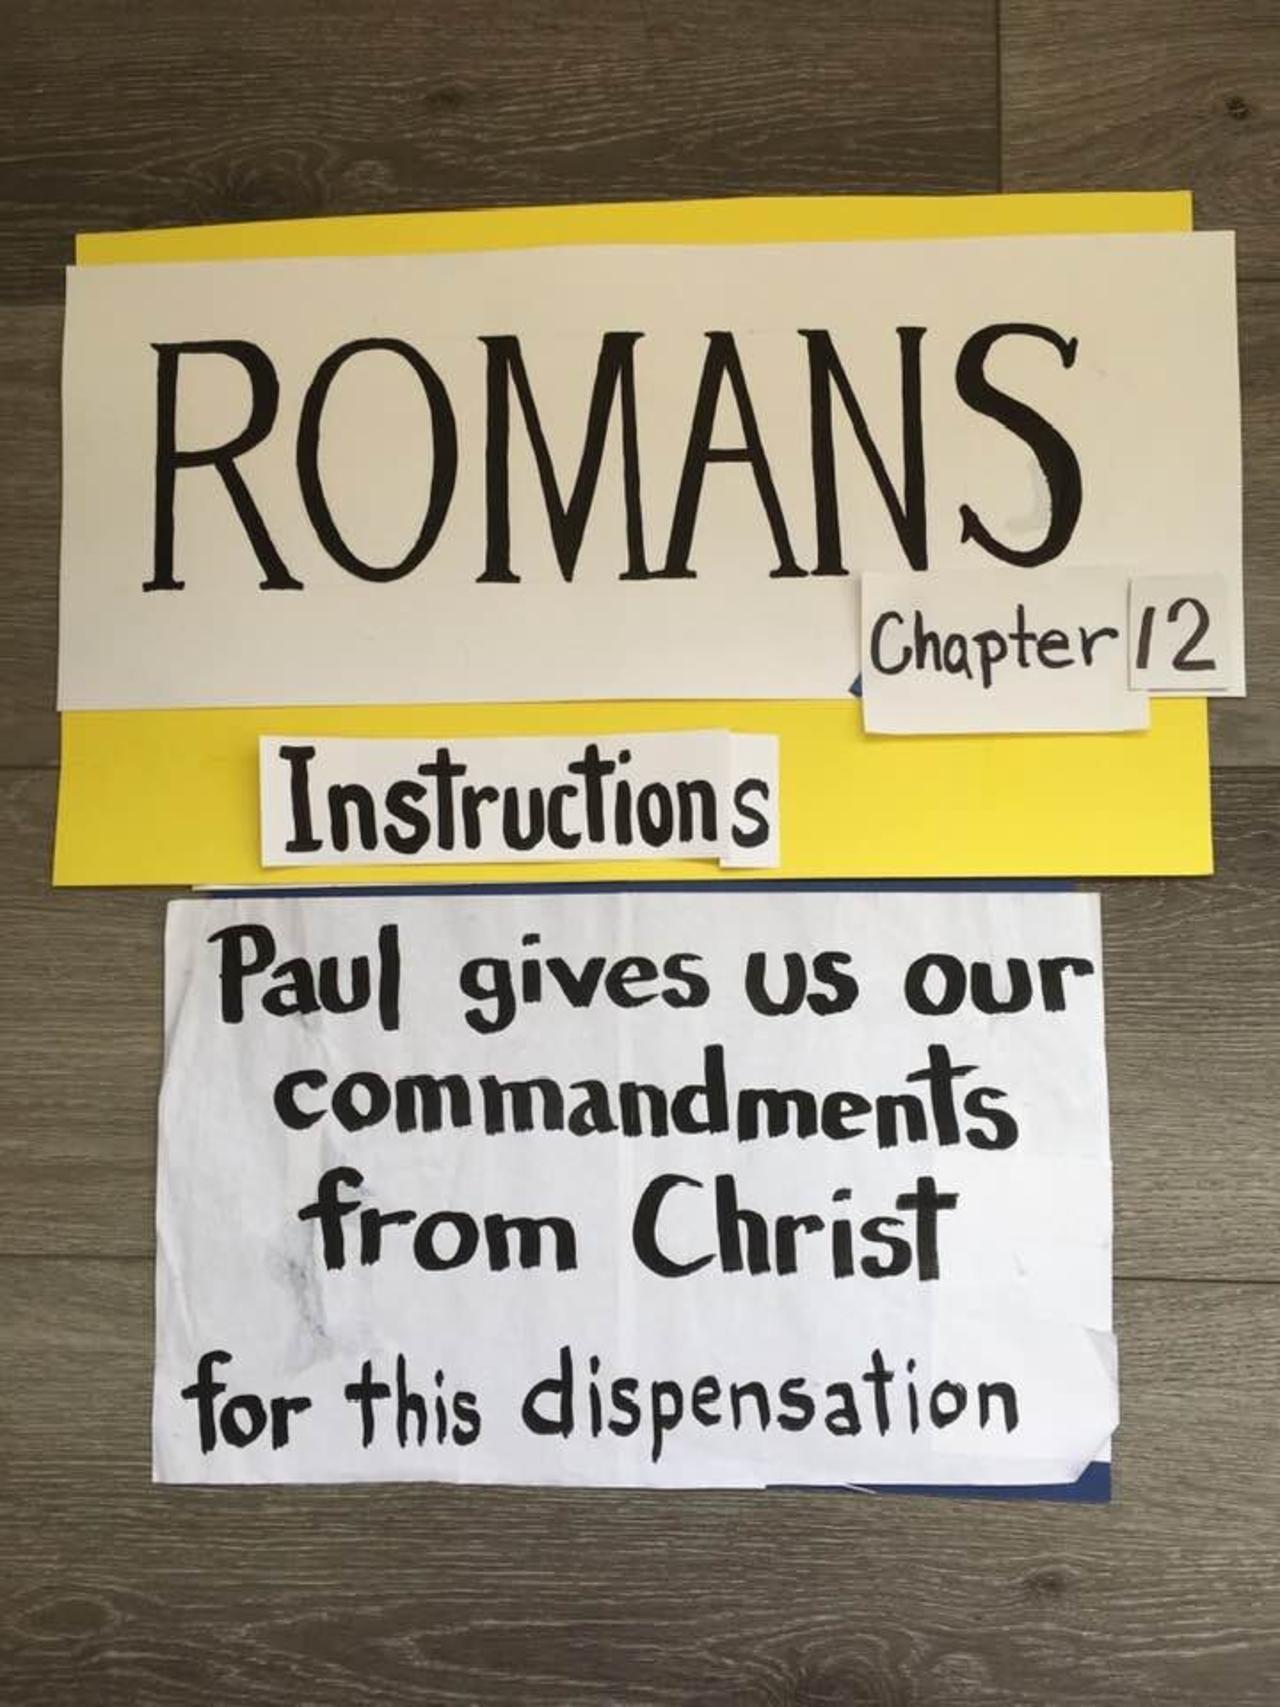 Romans Chapter 12 - Paul's instructions to the body of Christ - Marianne Manley